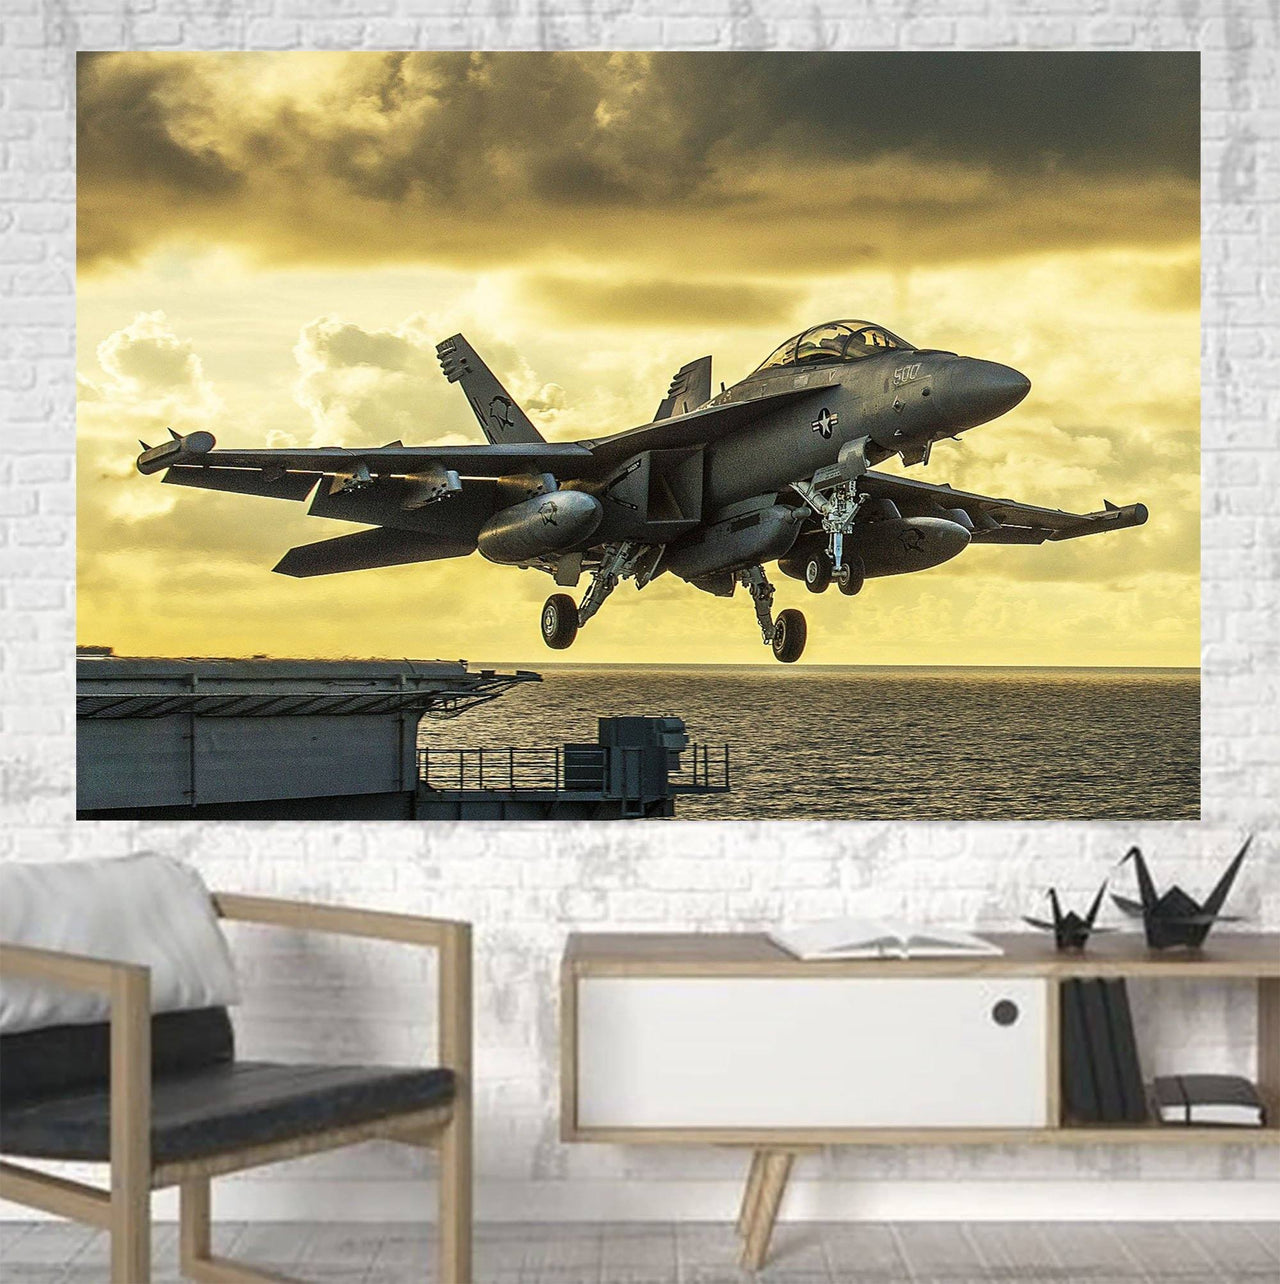 Departing Jet Aircraft Printed Canvas Posters (1 Piece) Aviation Shop 